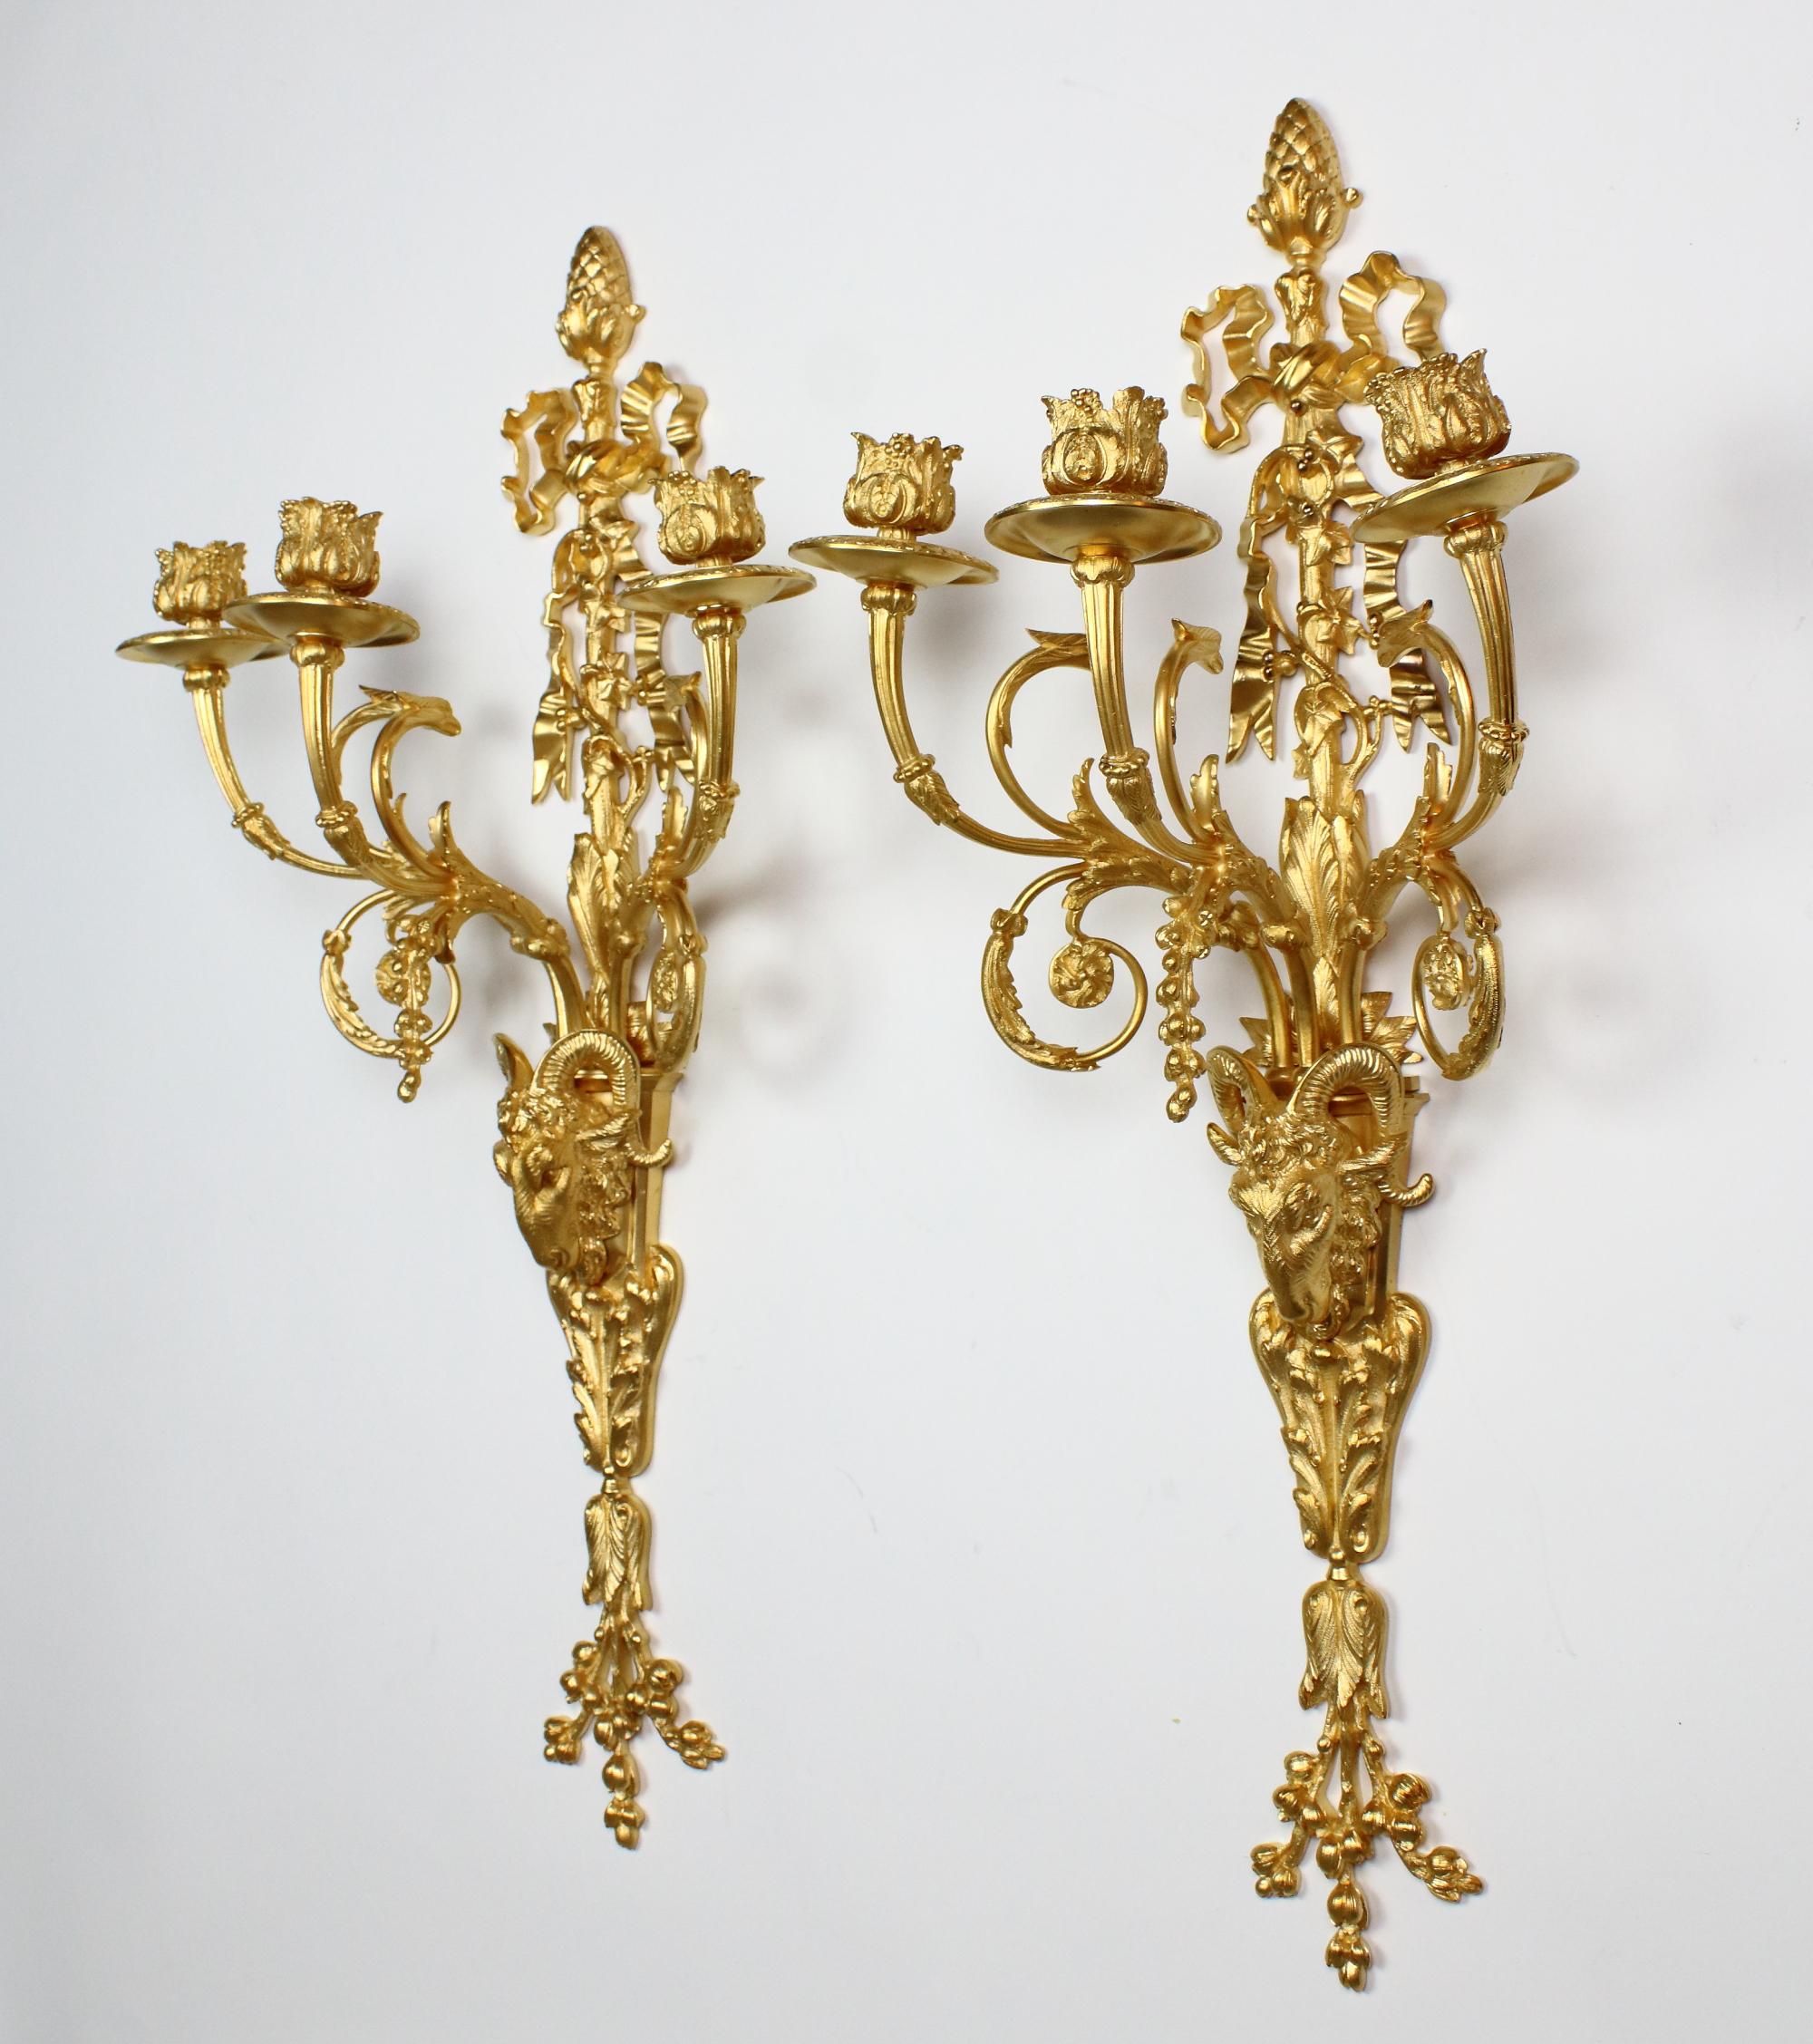 Pair of large French 19th century Louis XVI goat heads three-light wall lights/sconces

A pair Louis XVI style gilt bronze three-branch wall lights, each with a backplate the lower part of which is in the shape of a goat's head resting on a foliage